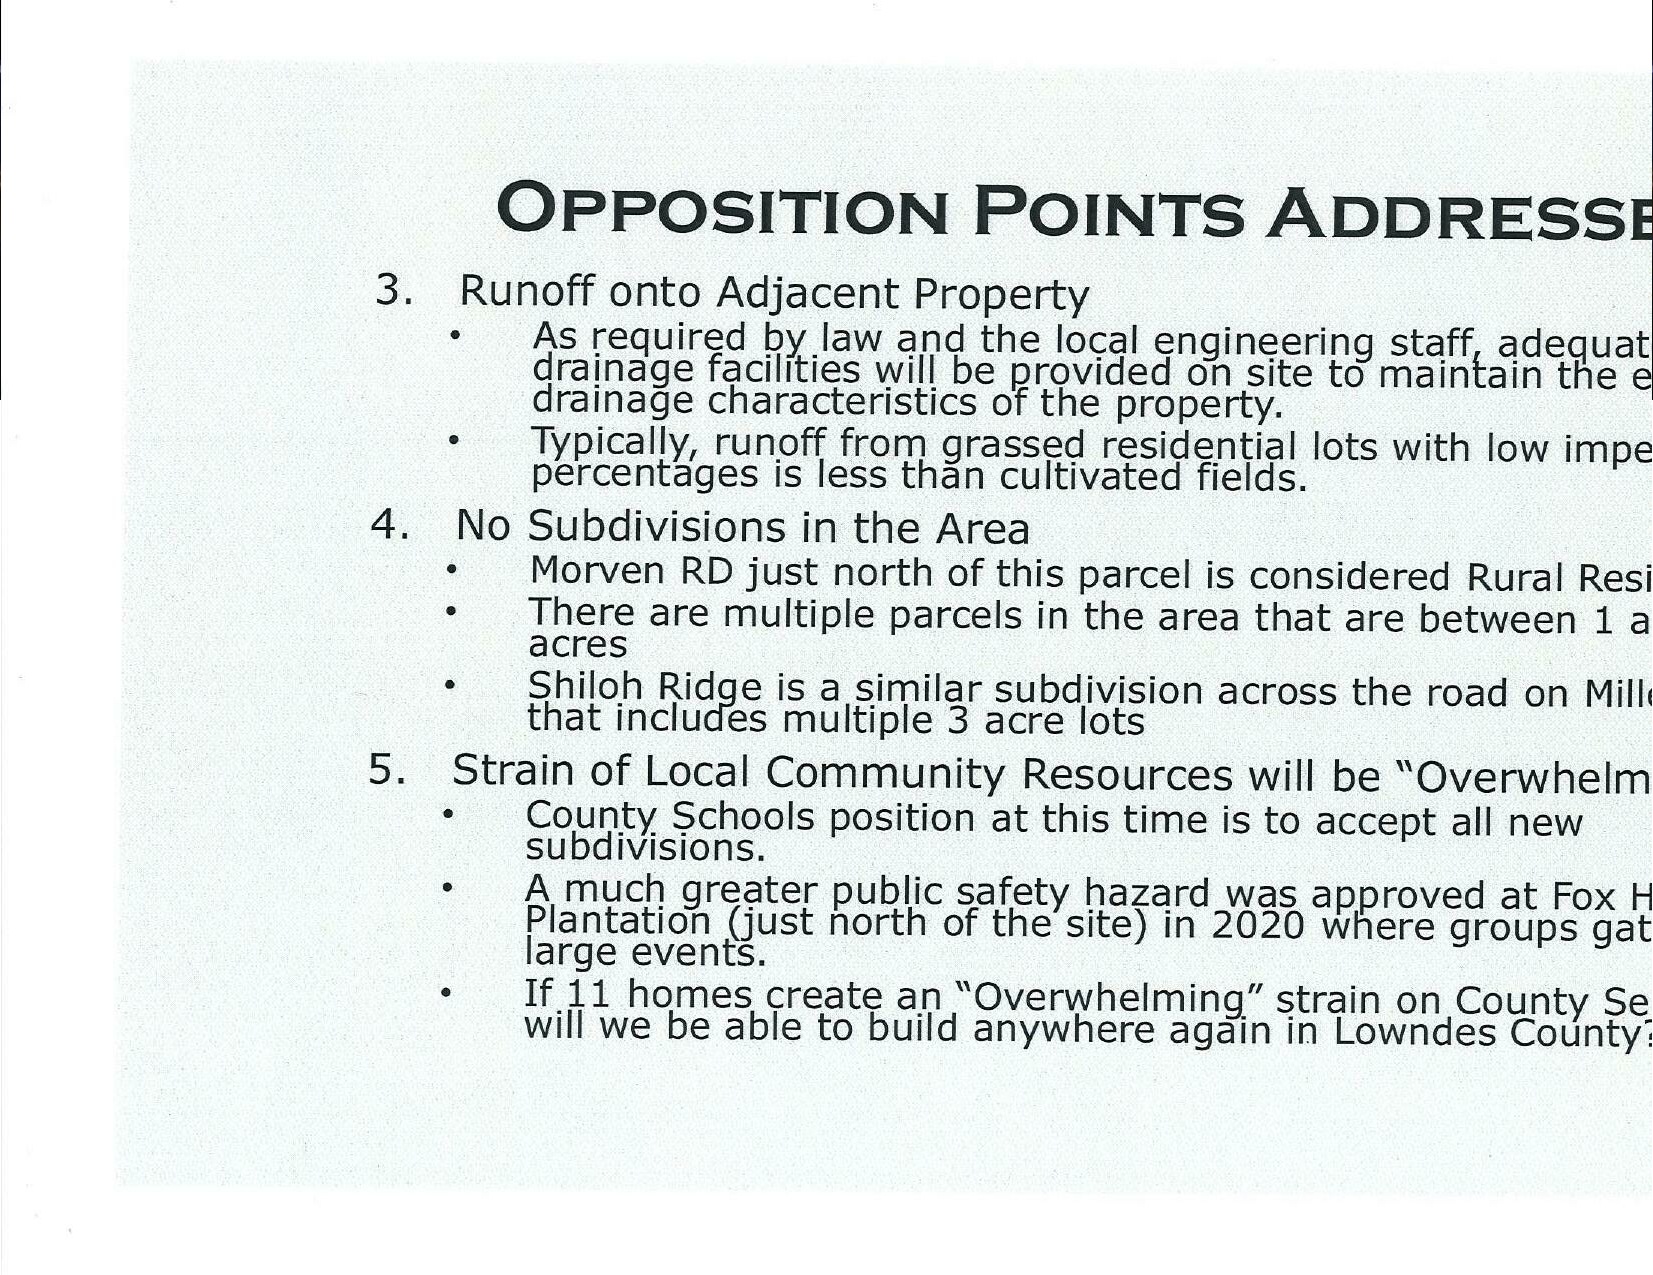 OPPOSITION POINTS ADDRESSED (2 of 3)